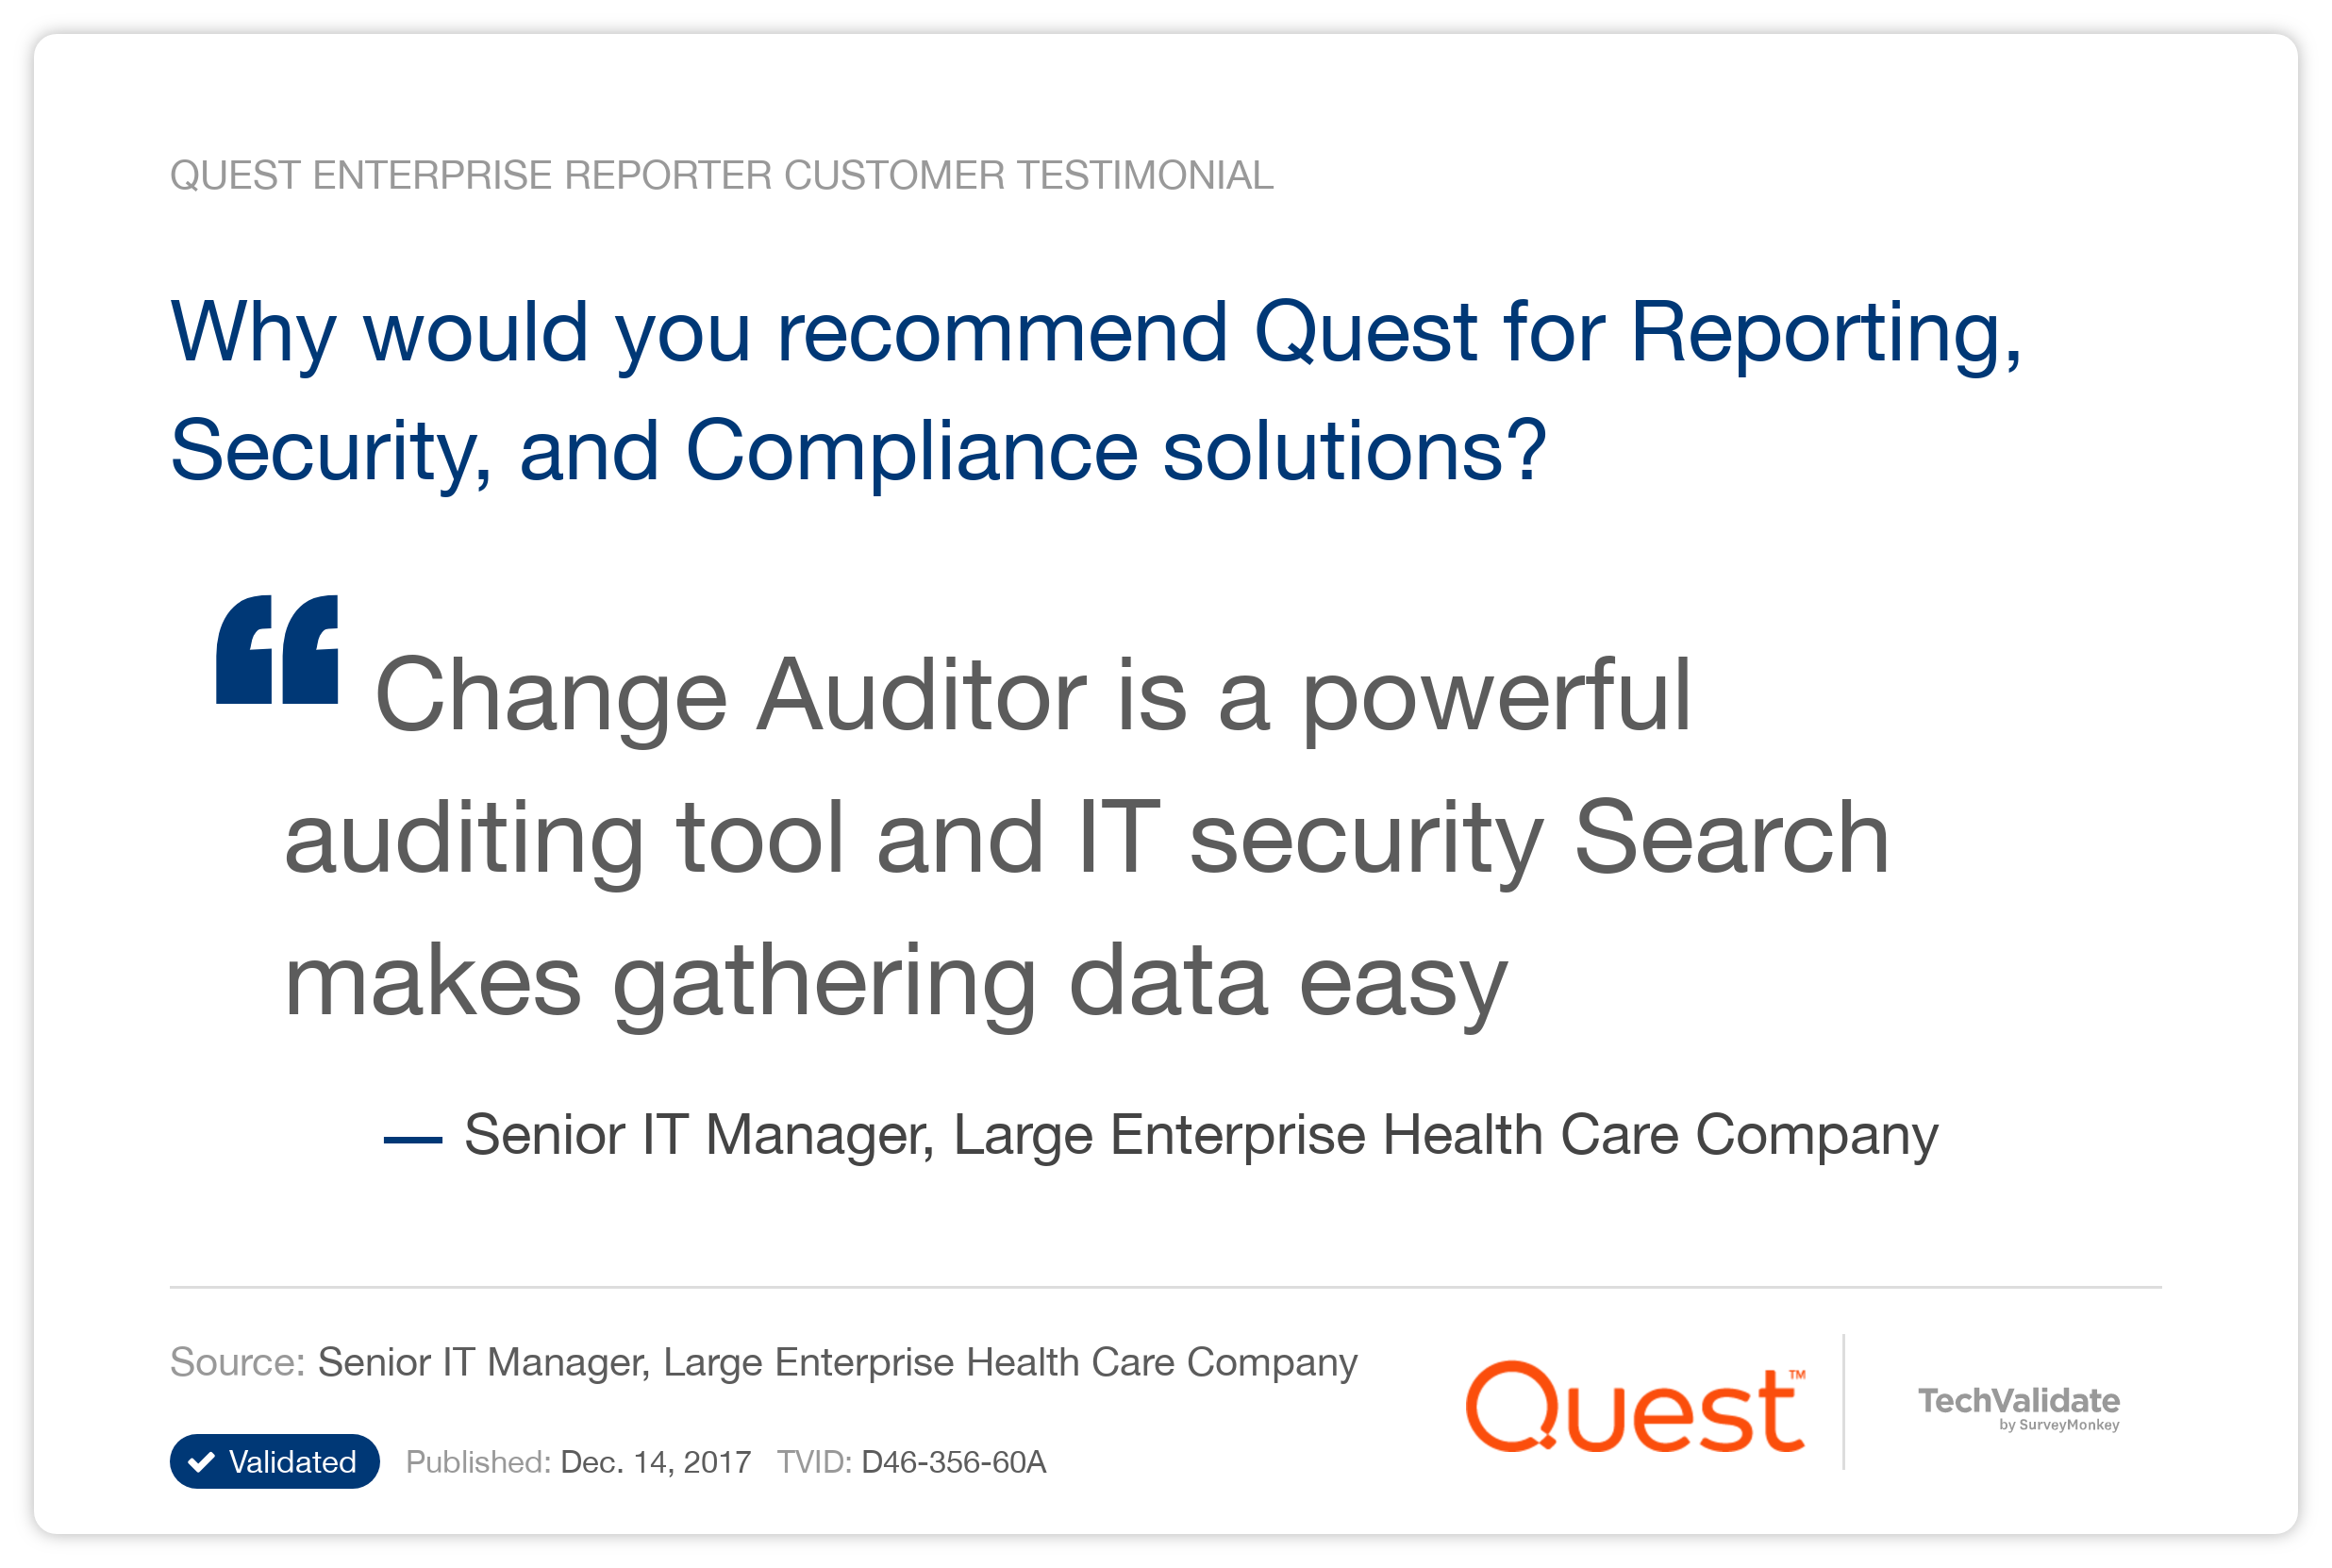 Why would you recommend Quest for Reporting, Security, and Compliance solutions?